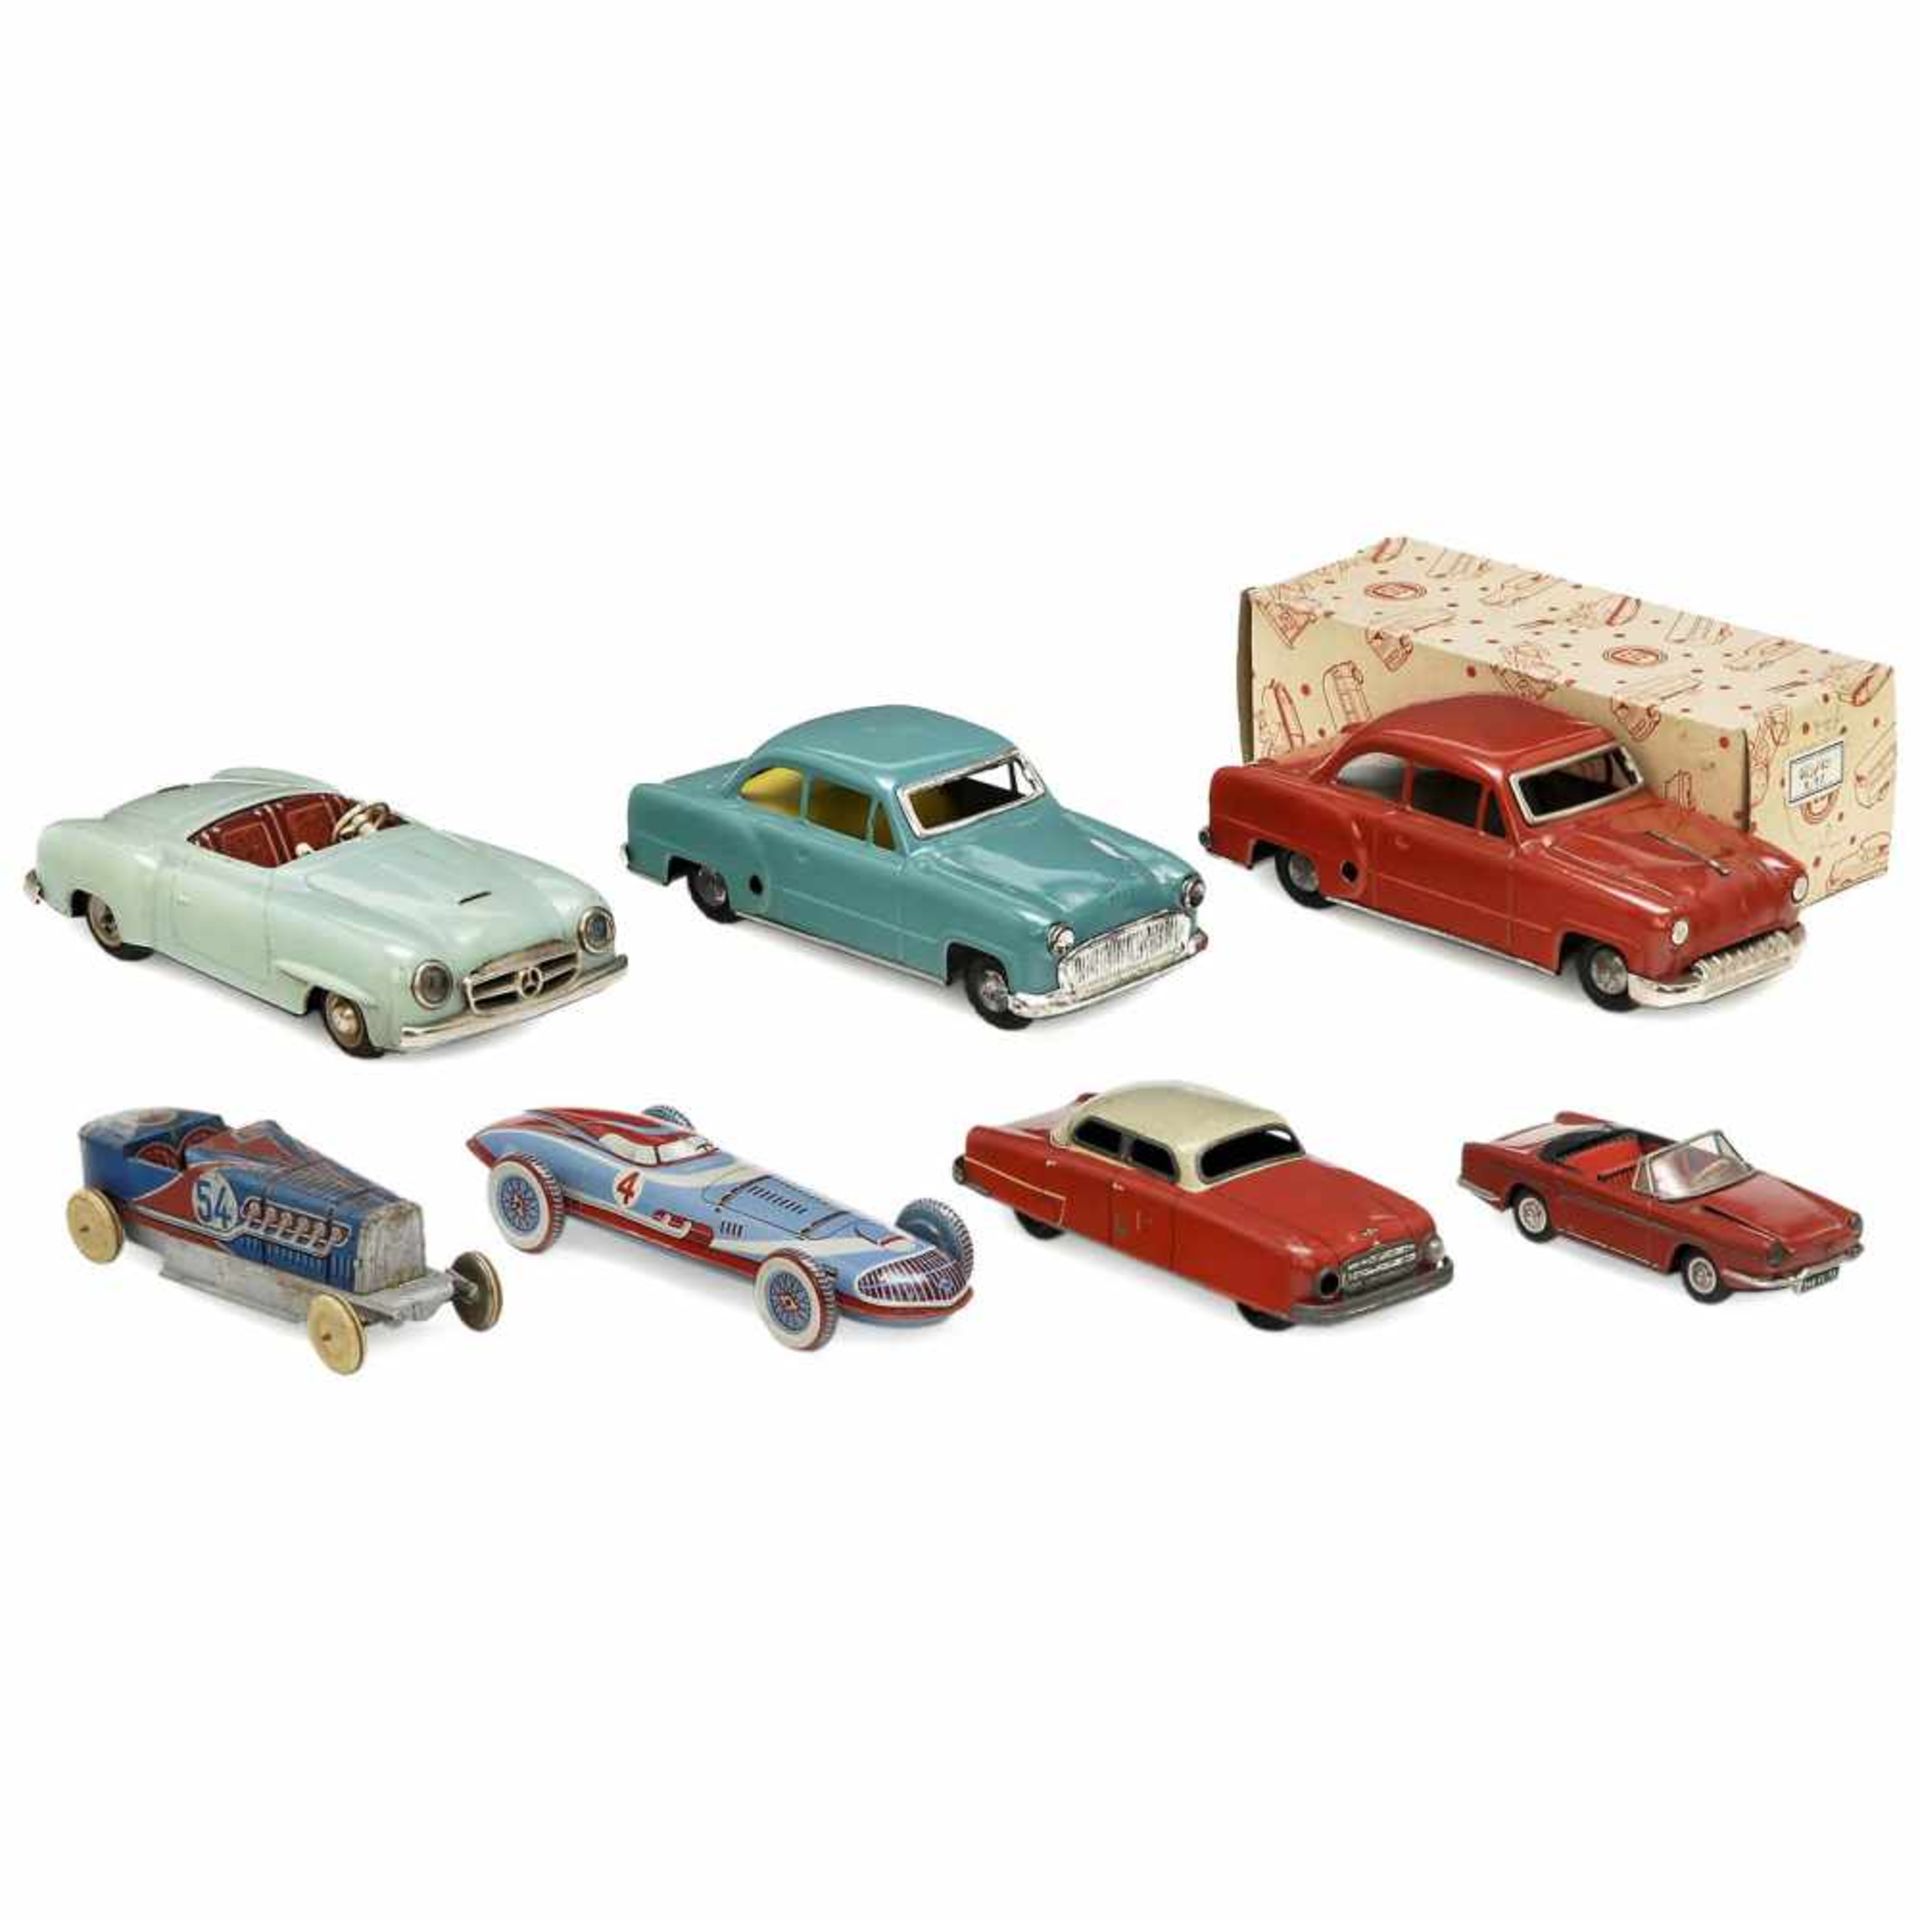 7 Tin-Toy Cars, c. 1958Lithographed tin. 1) Joustra, Renault Floride convertible, friction (